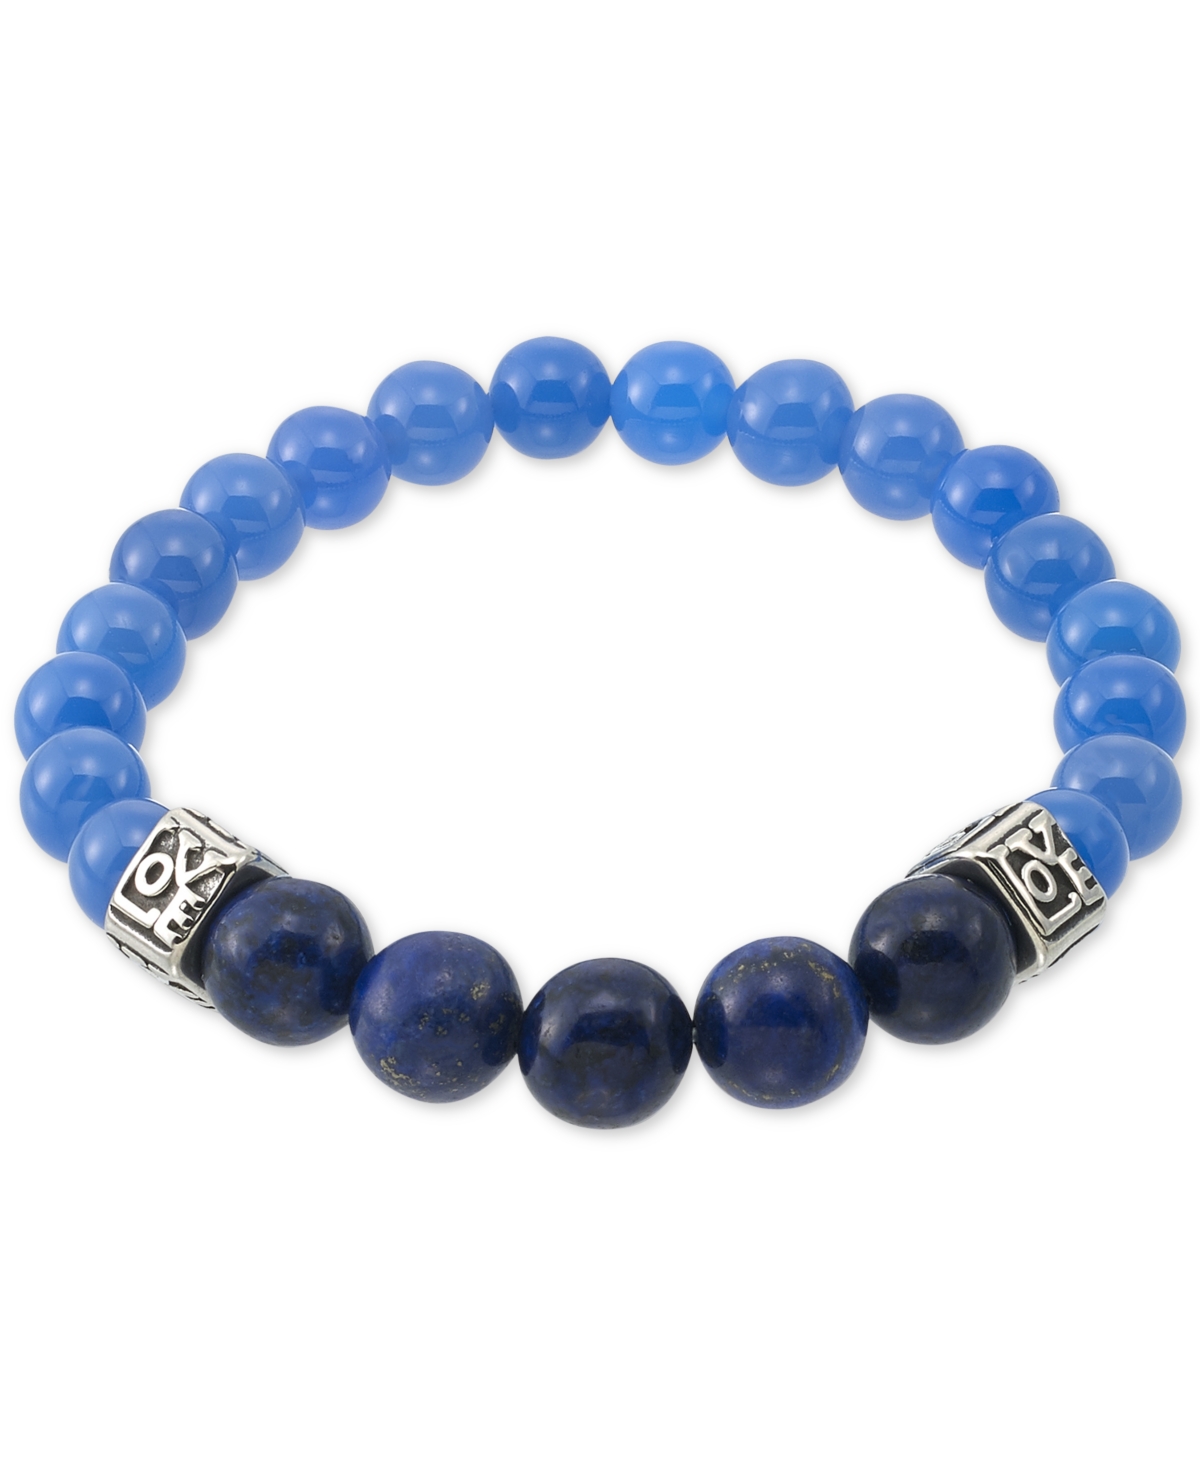 Legacy for Men by Simone I. Smith Dyed Black Lapis Lazuli (10mm) & Blue Agate (8mm) Men's Stretch Bracelet in Stainless Steel